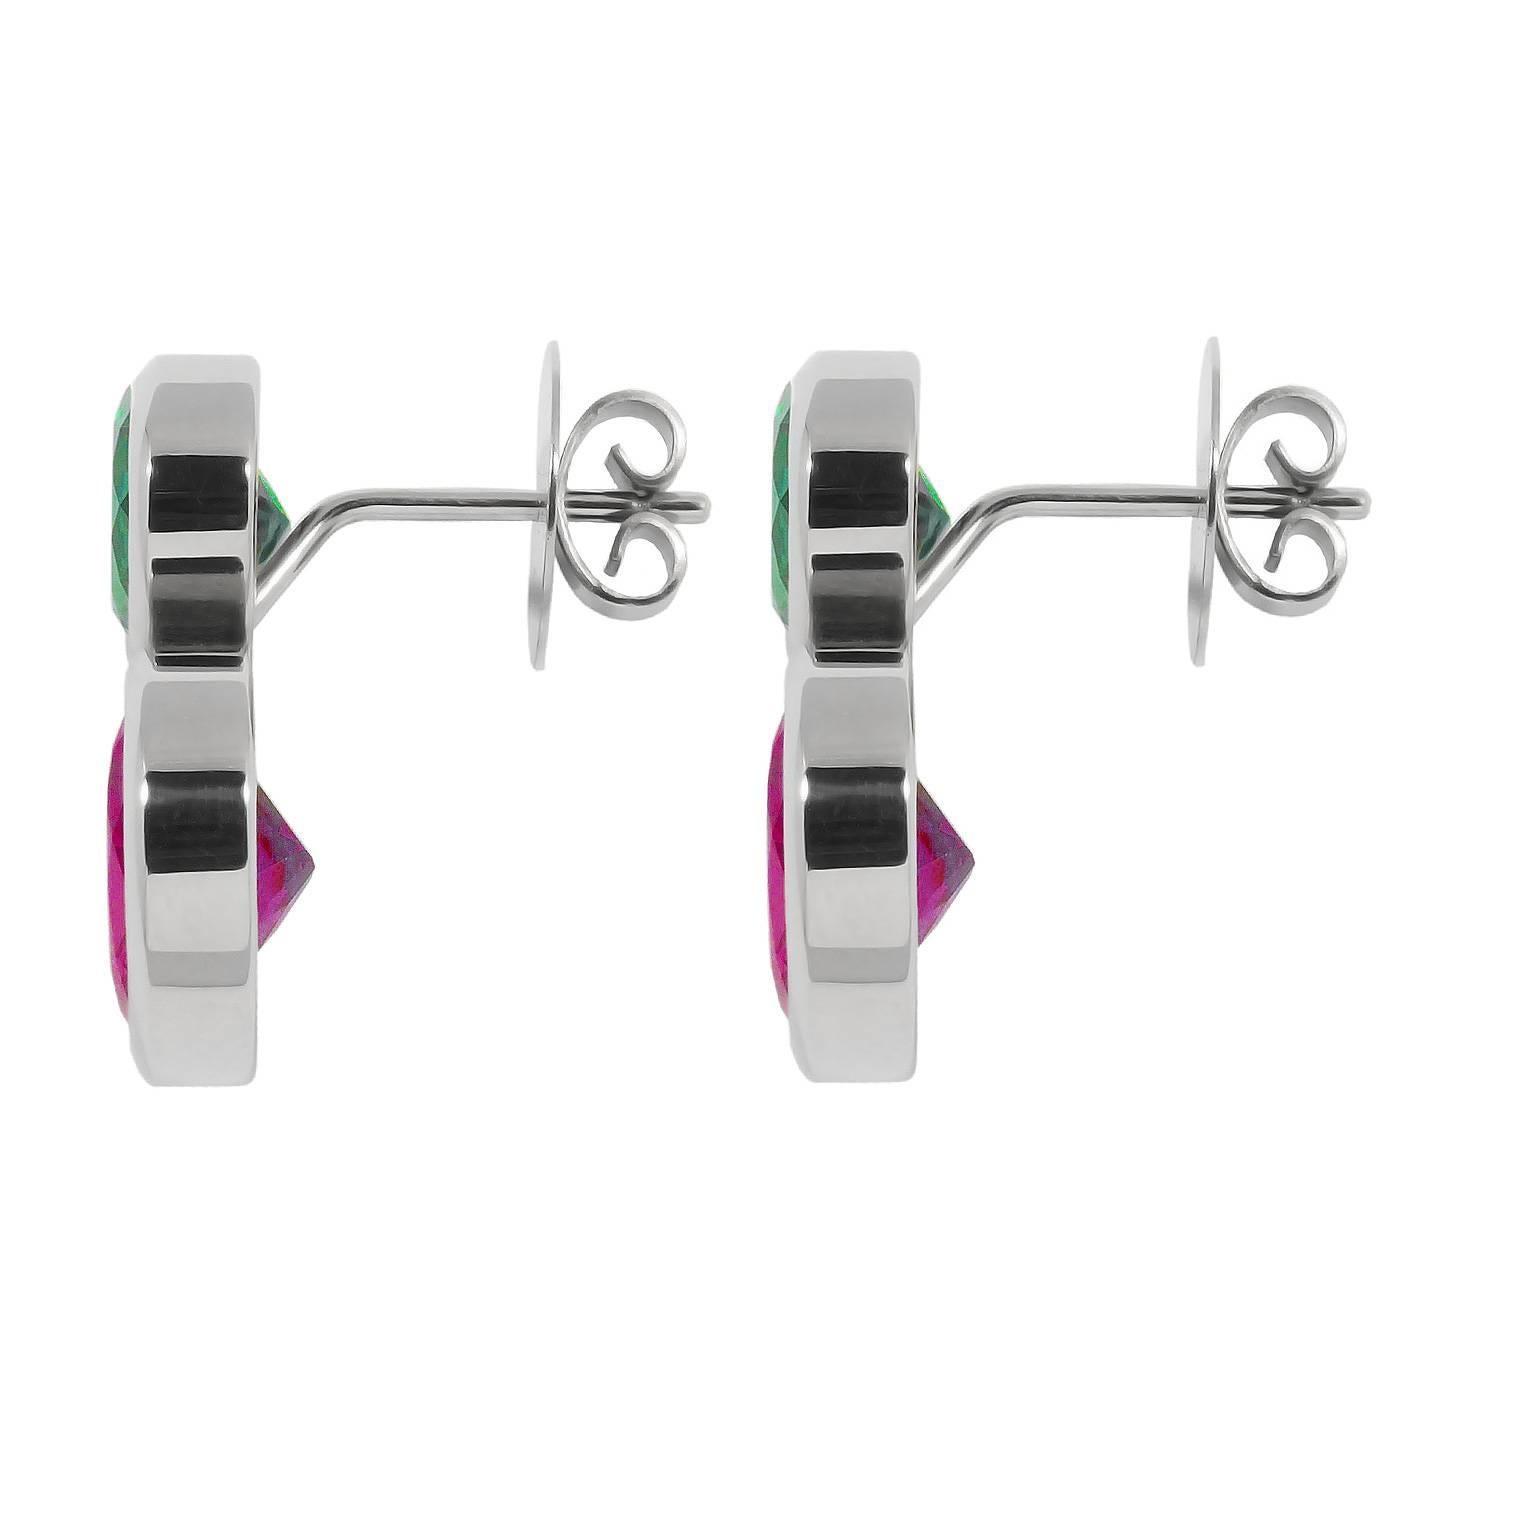 Two beautiful vibrant colors are mixed up in these 18k white gold earrings. With its perfect length of 22 mm they are wearable every day. The green tourmalines have a weight of 5.4 ct and the rhodolite 12.36 ct. Designed by Colleen B. Rosenblat.